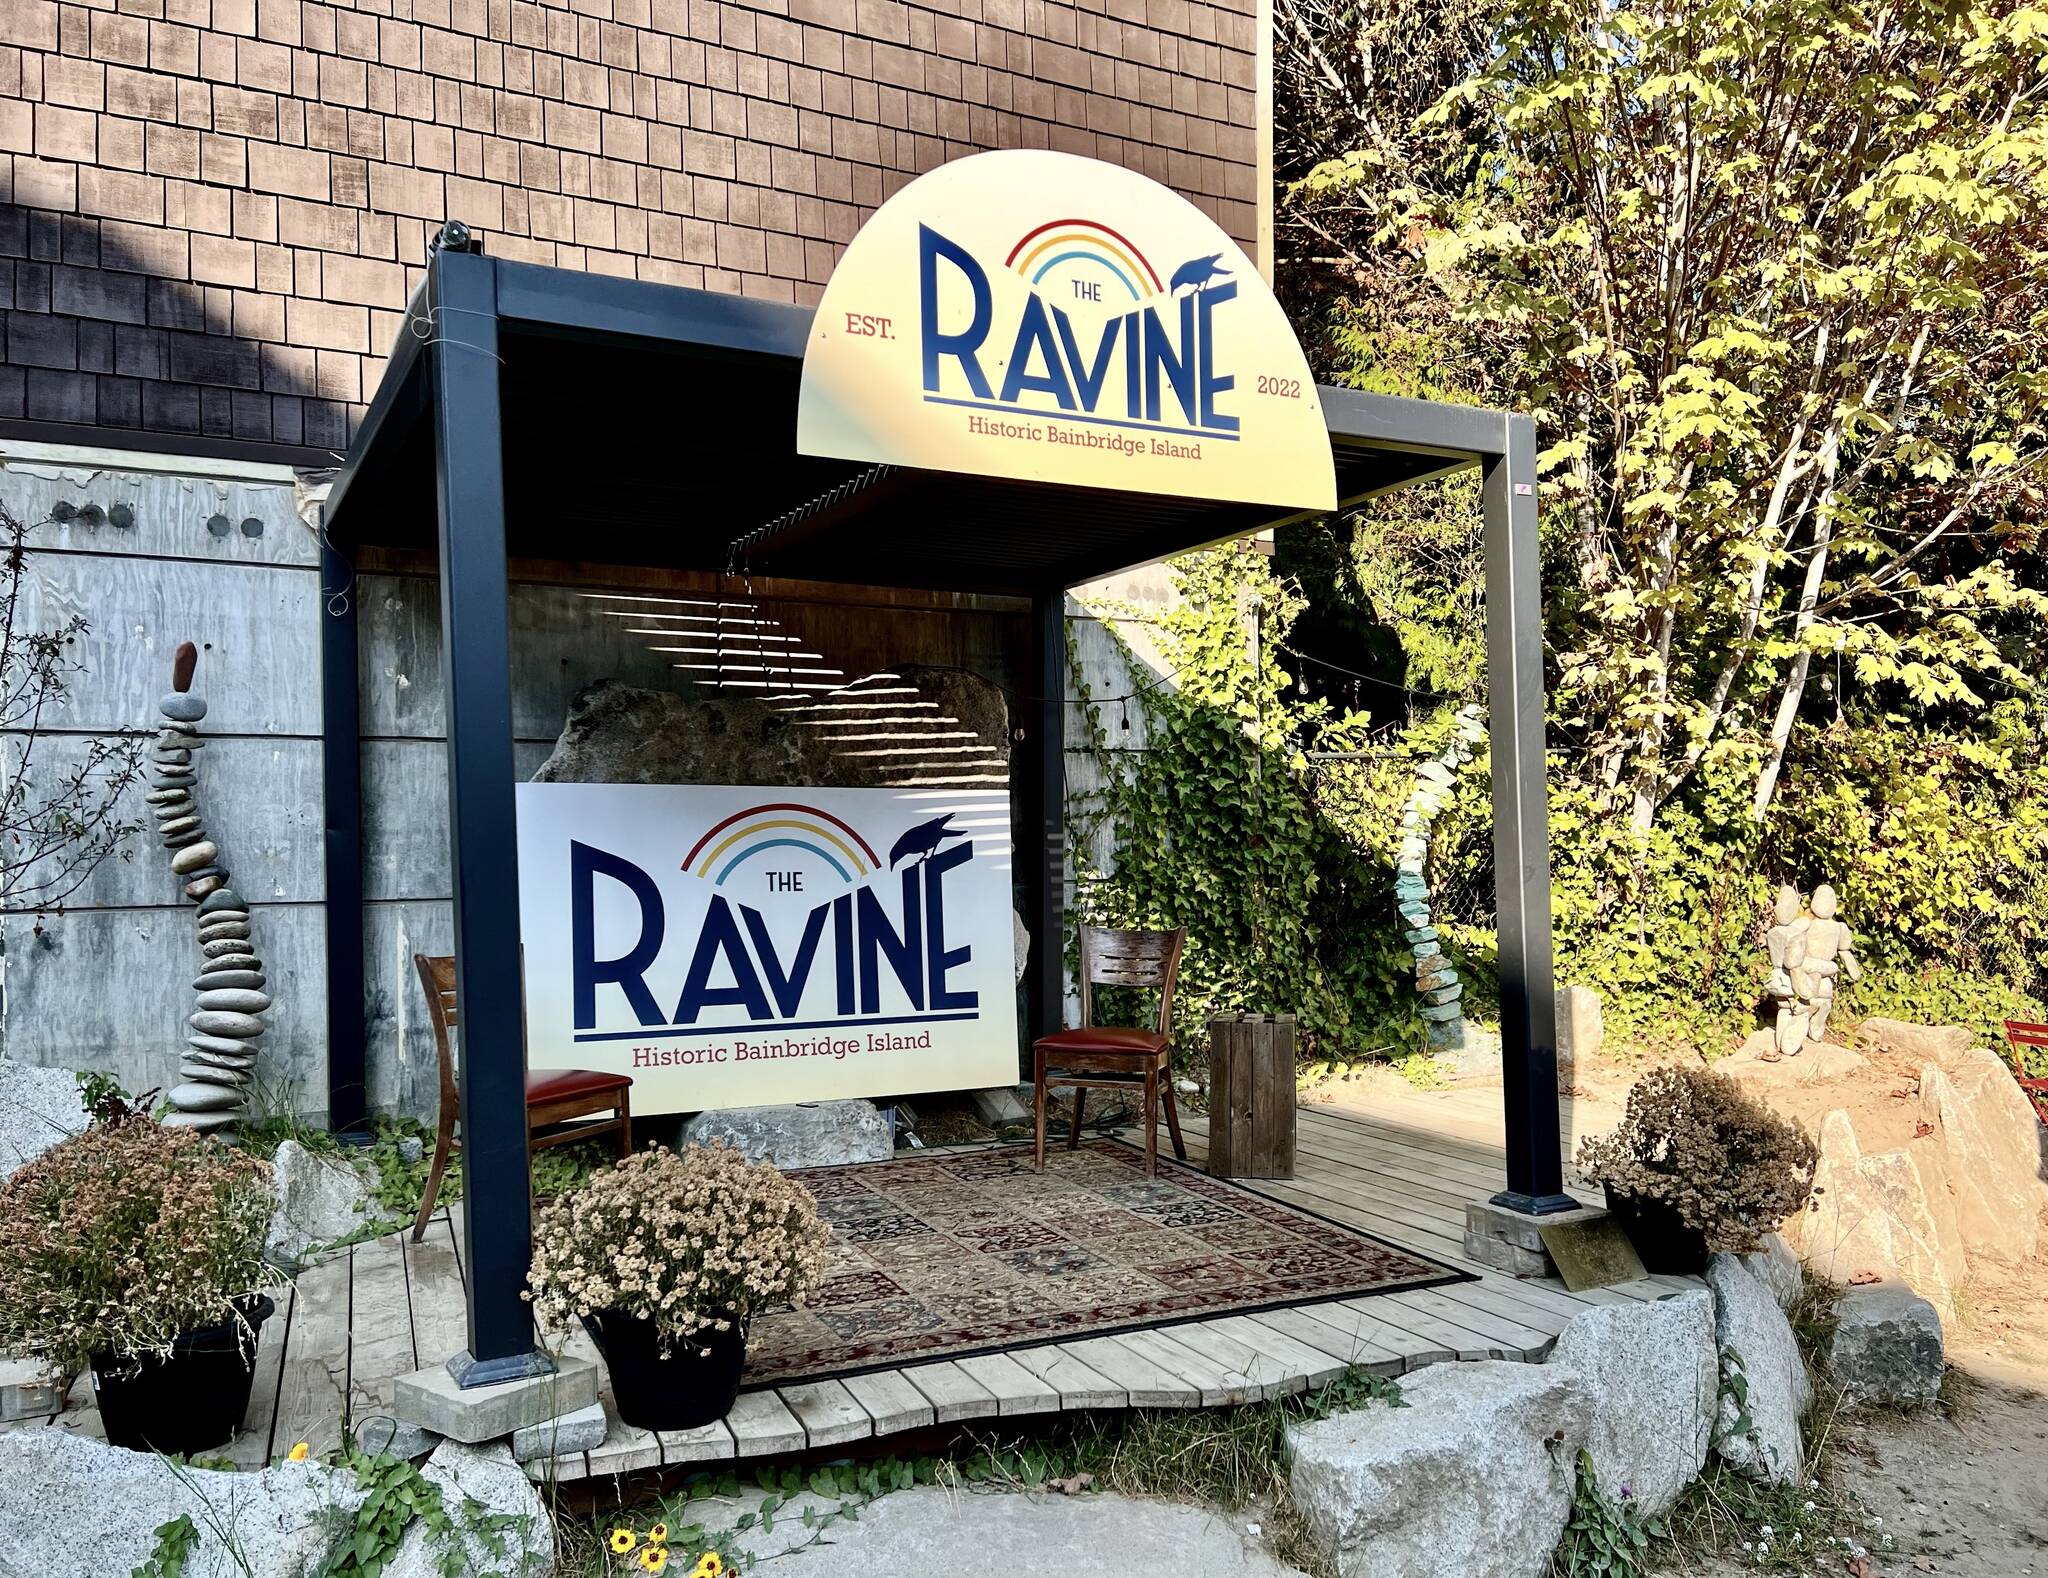 The Ravine is a new music venue hosting live acts in Winslow located behind the Bainbridge Apothecary and Tea Shop. Nancy Treder/Kitsap News Group